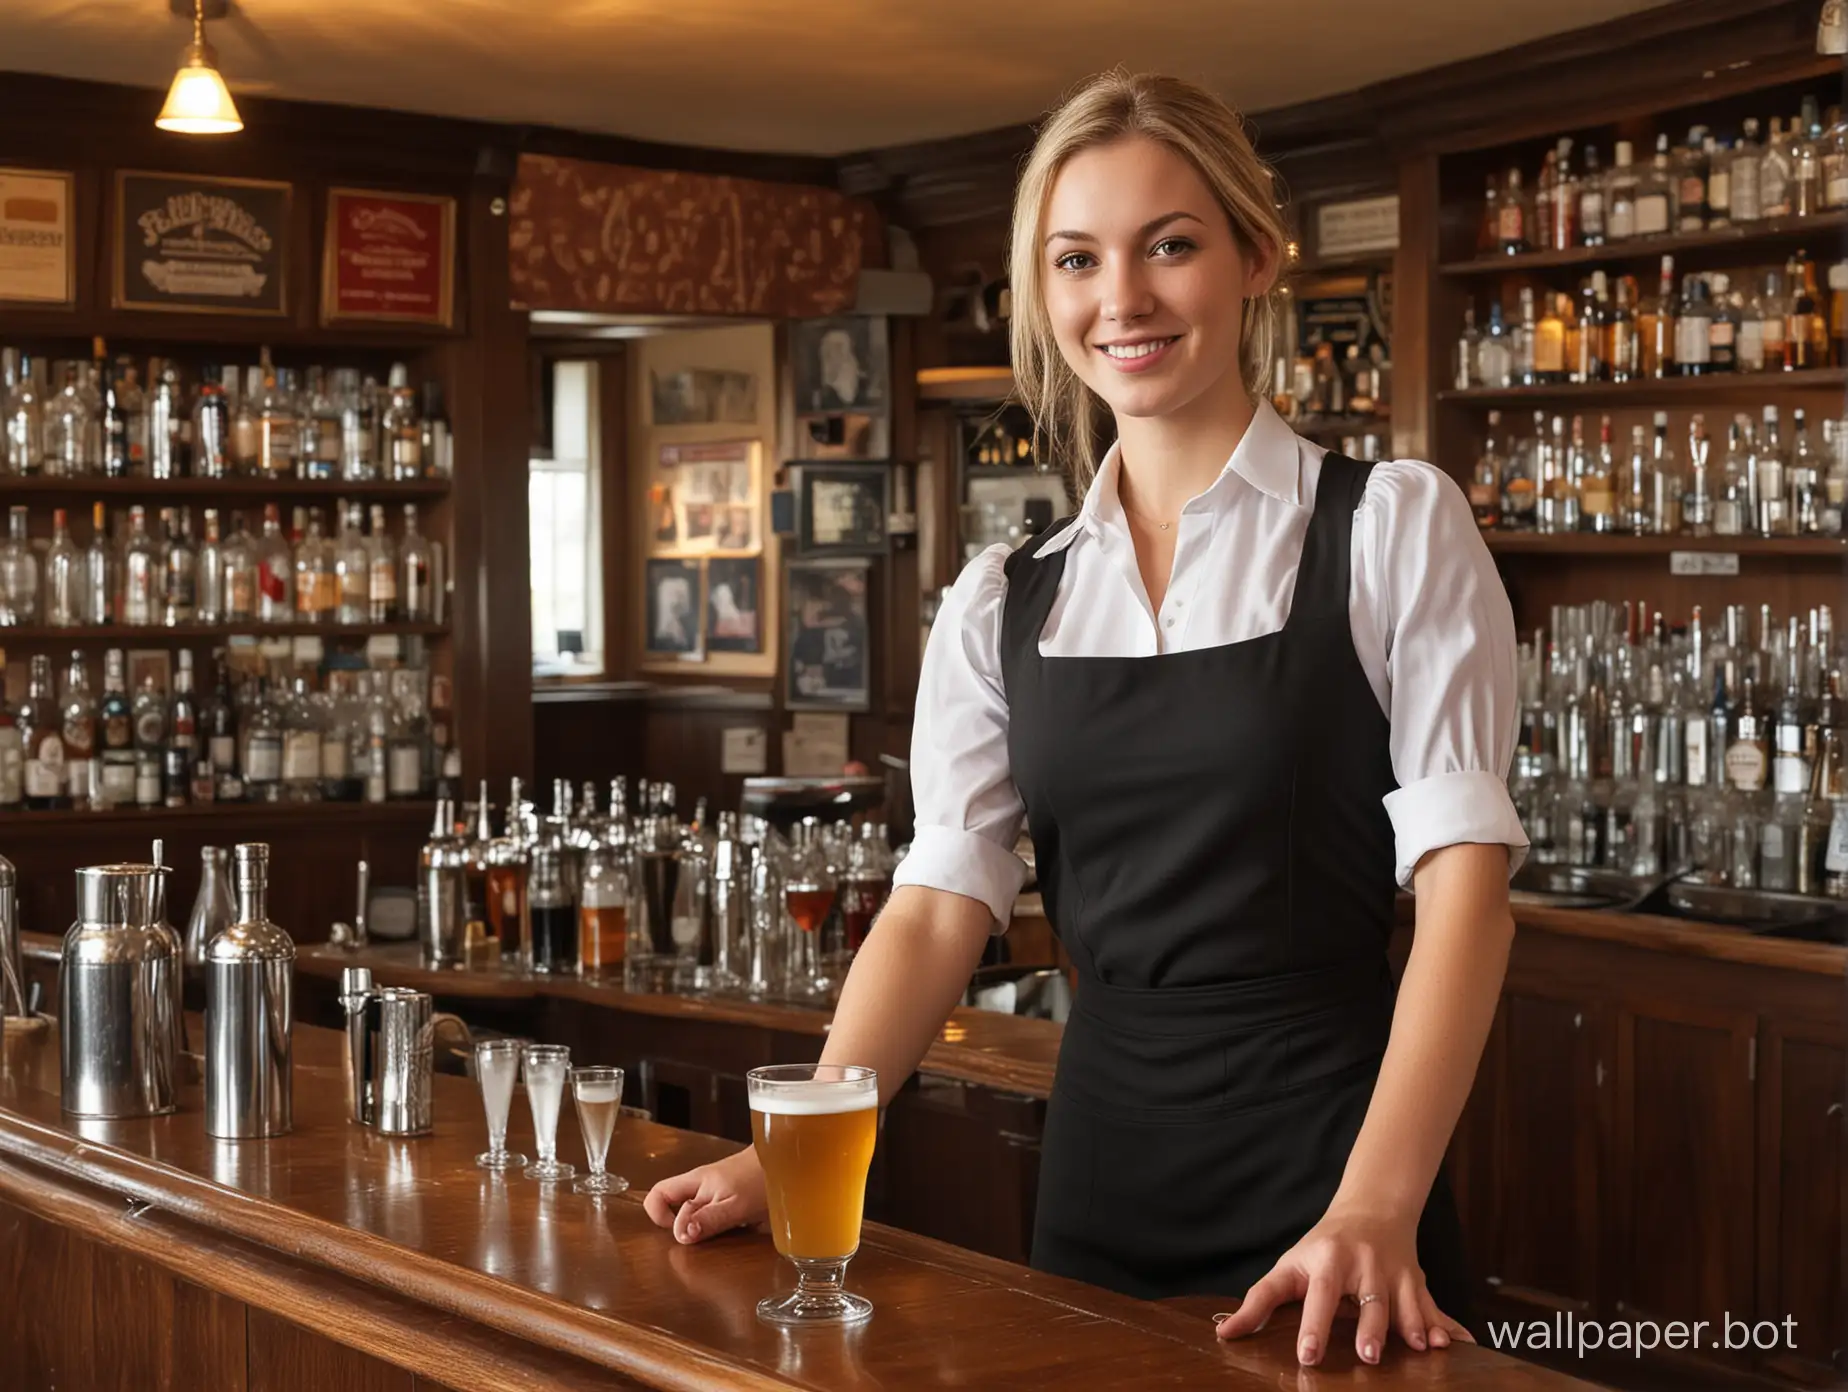 Waitress serving drinks in an English pub